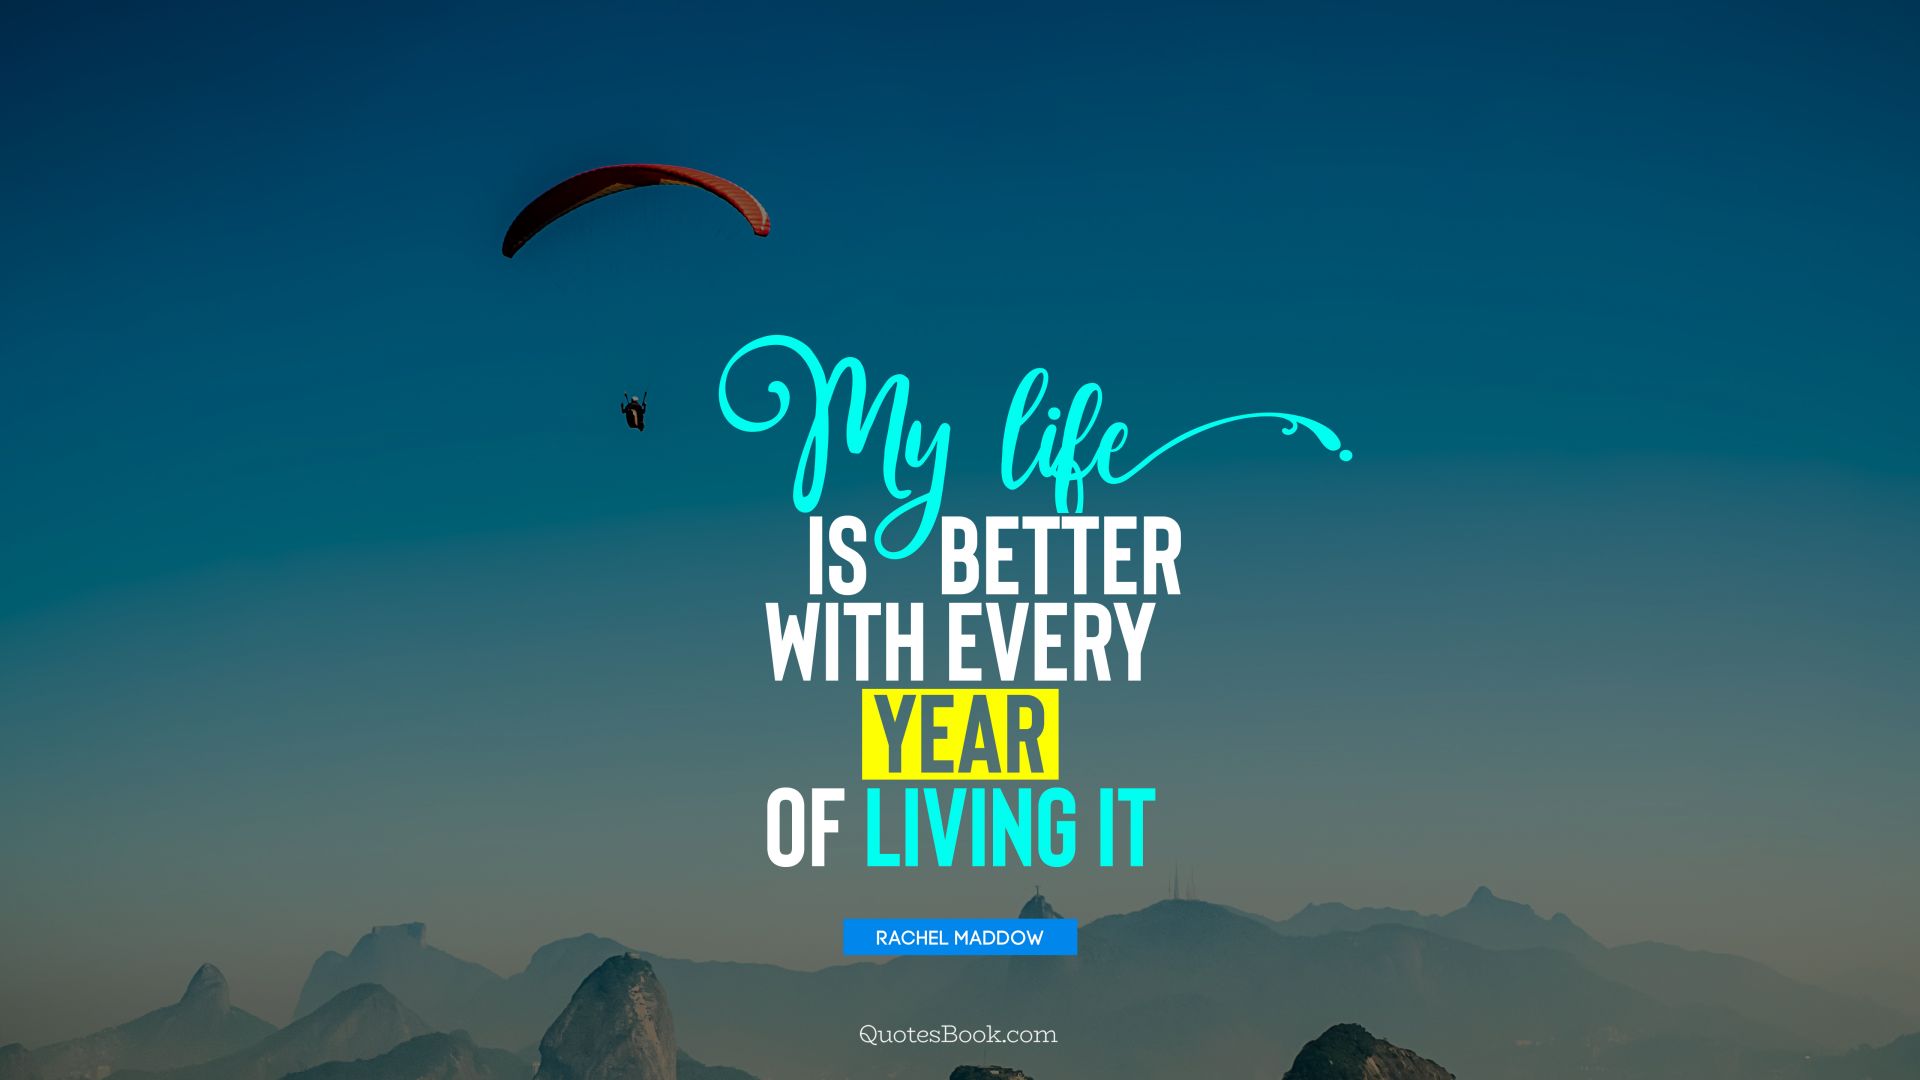 My life is better with every year of living it. - Quote by Rachel Maddow